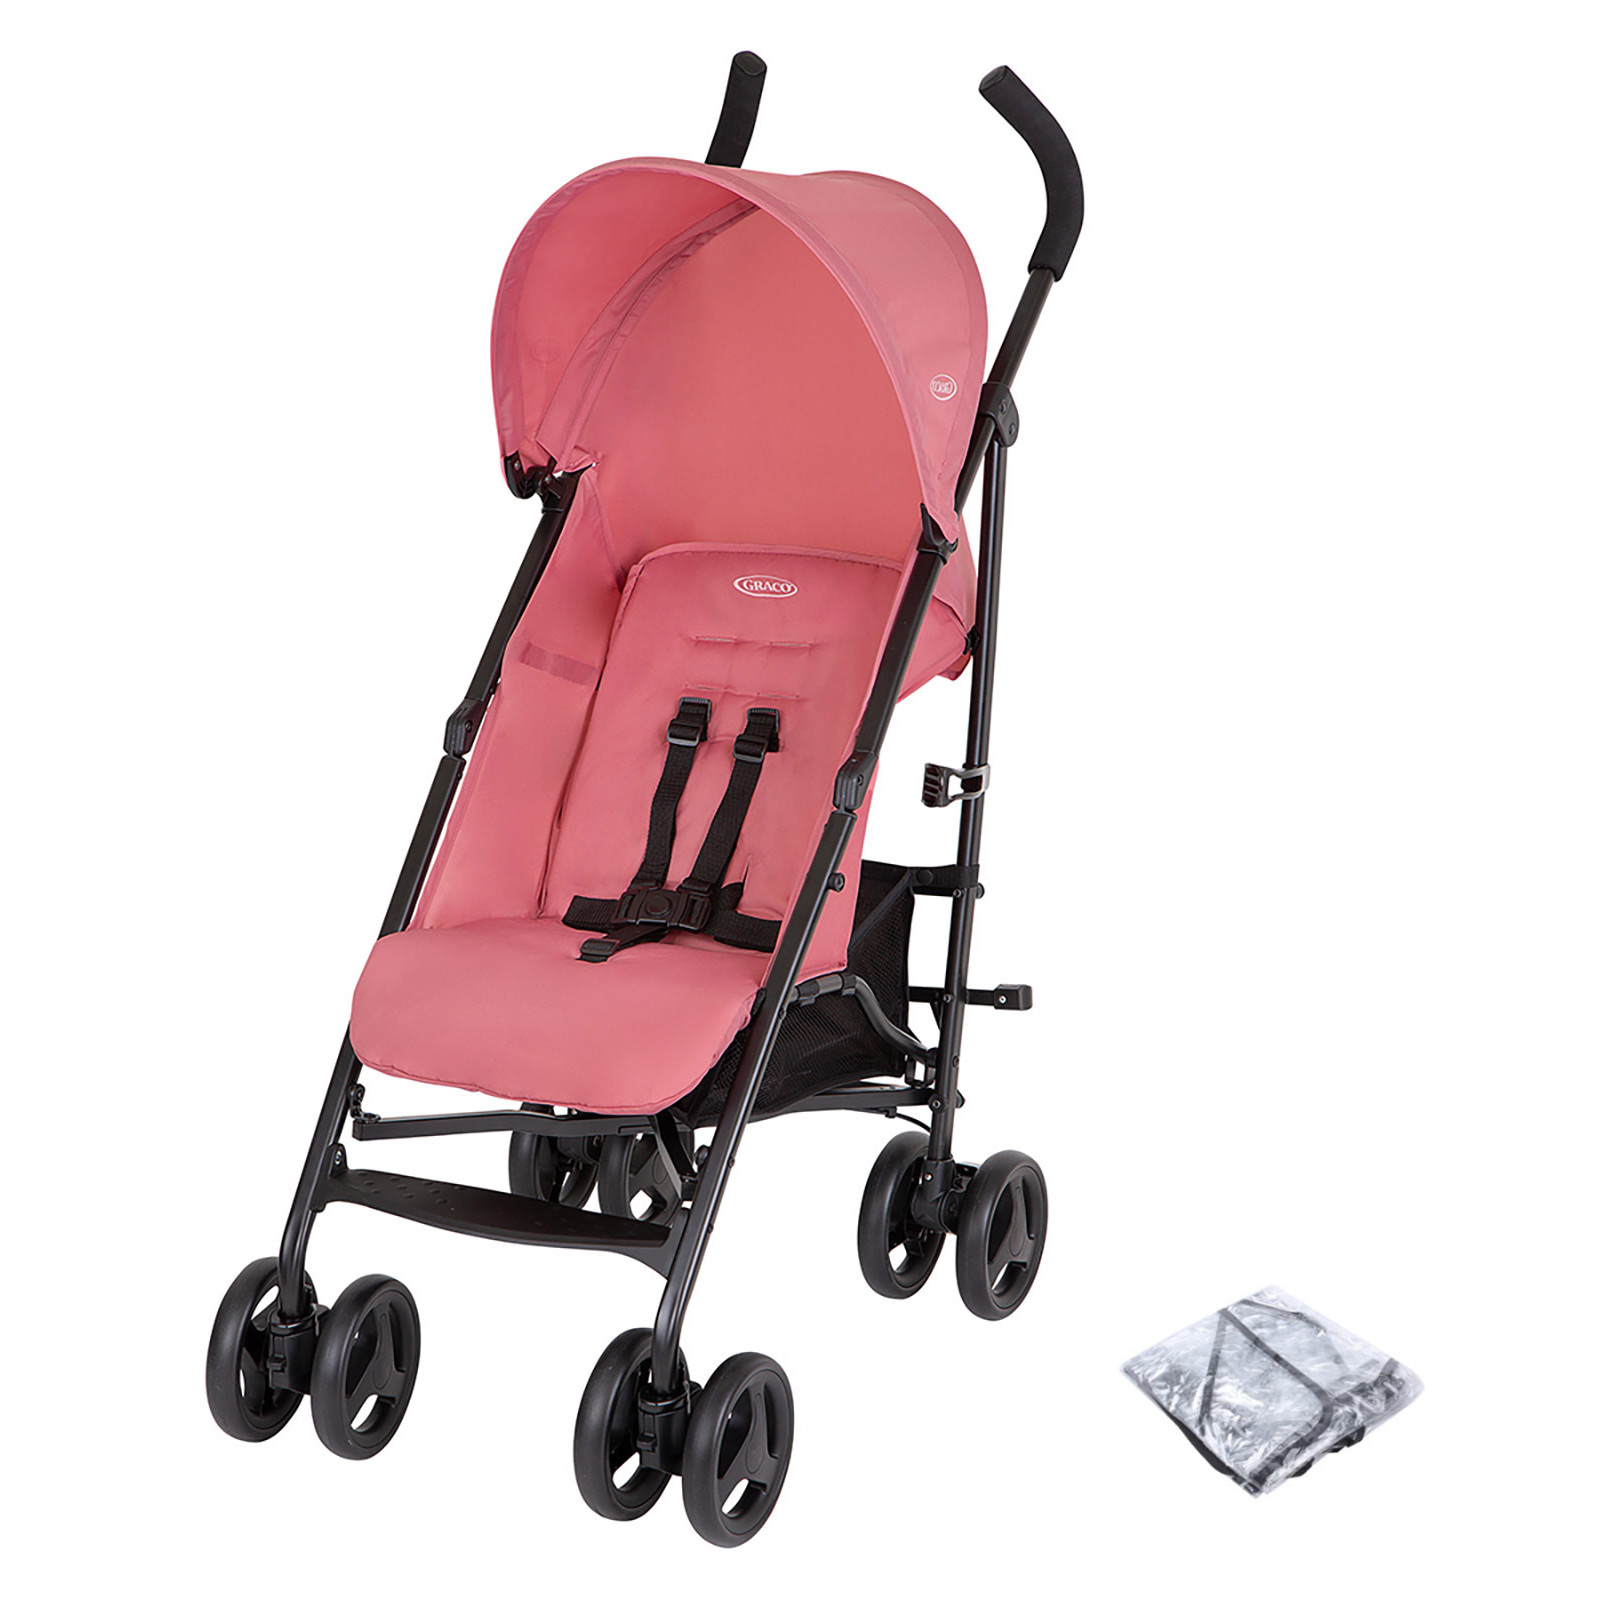 Graco Speedie™ Stroller with Raincover - Pink